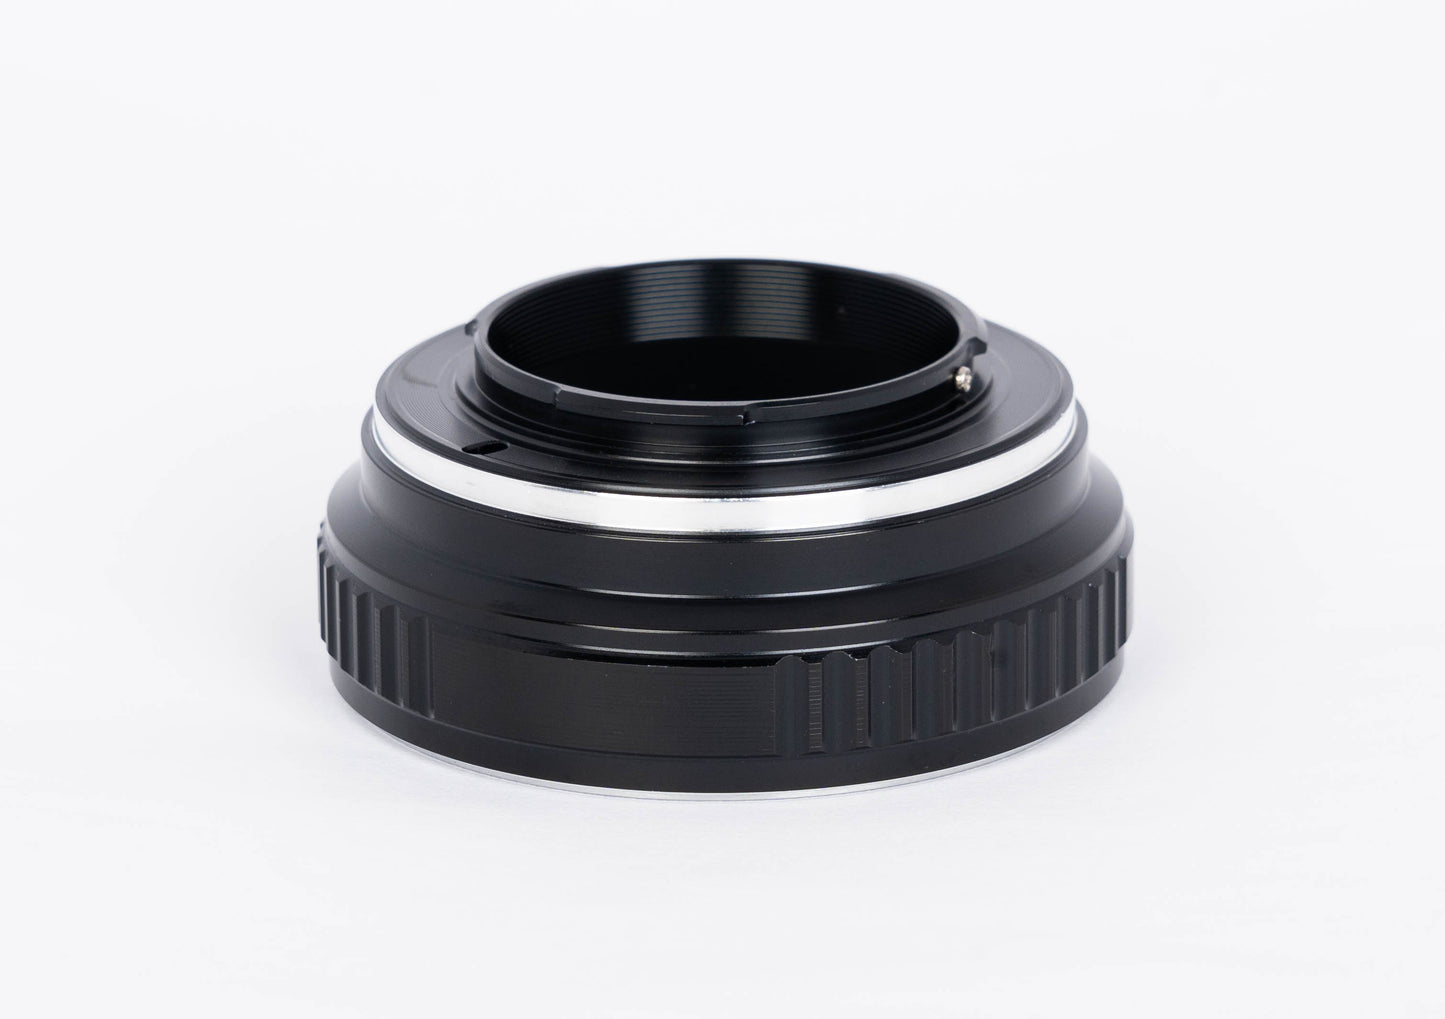 K&F Concept adapter for Minolta MD MC Lens Mount to Micro Four Thirds MFT M43